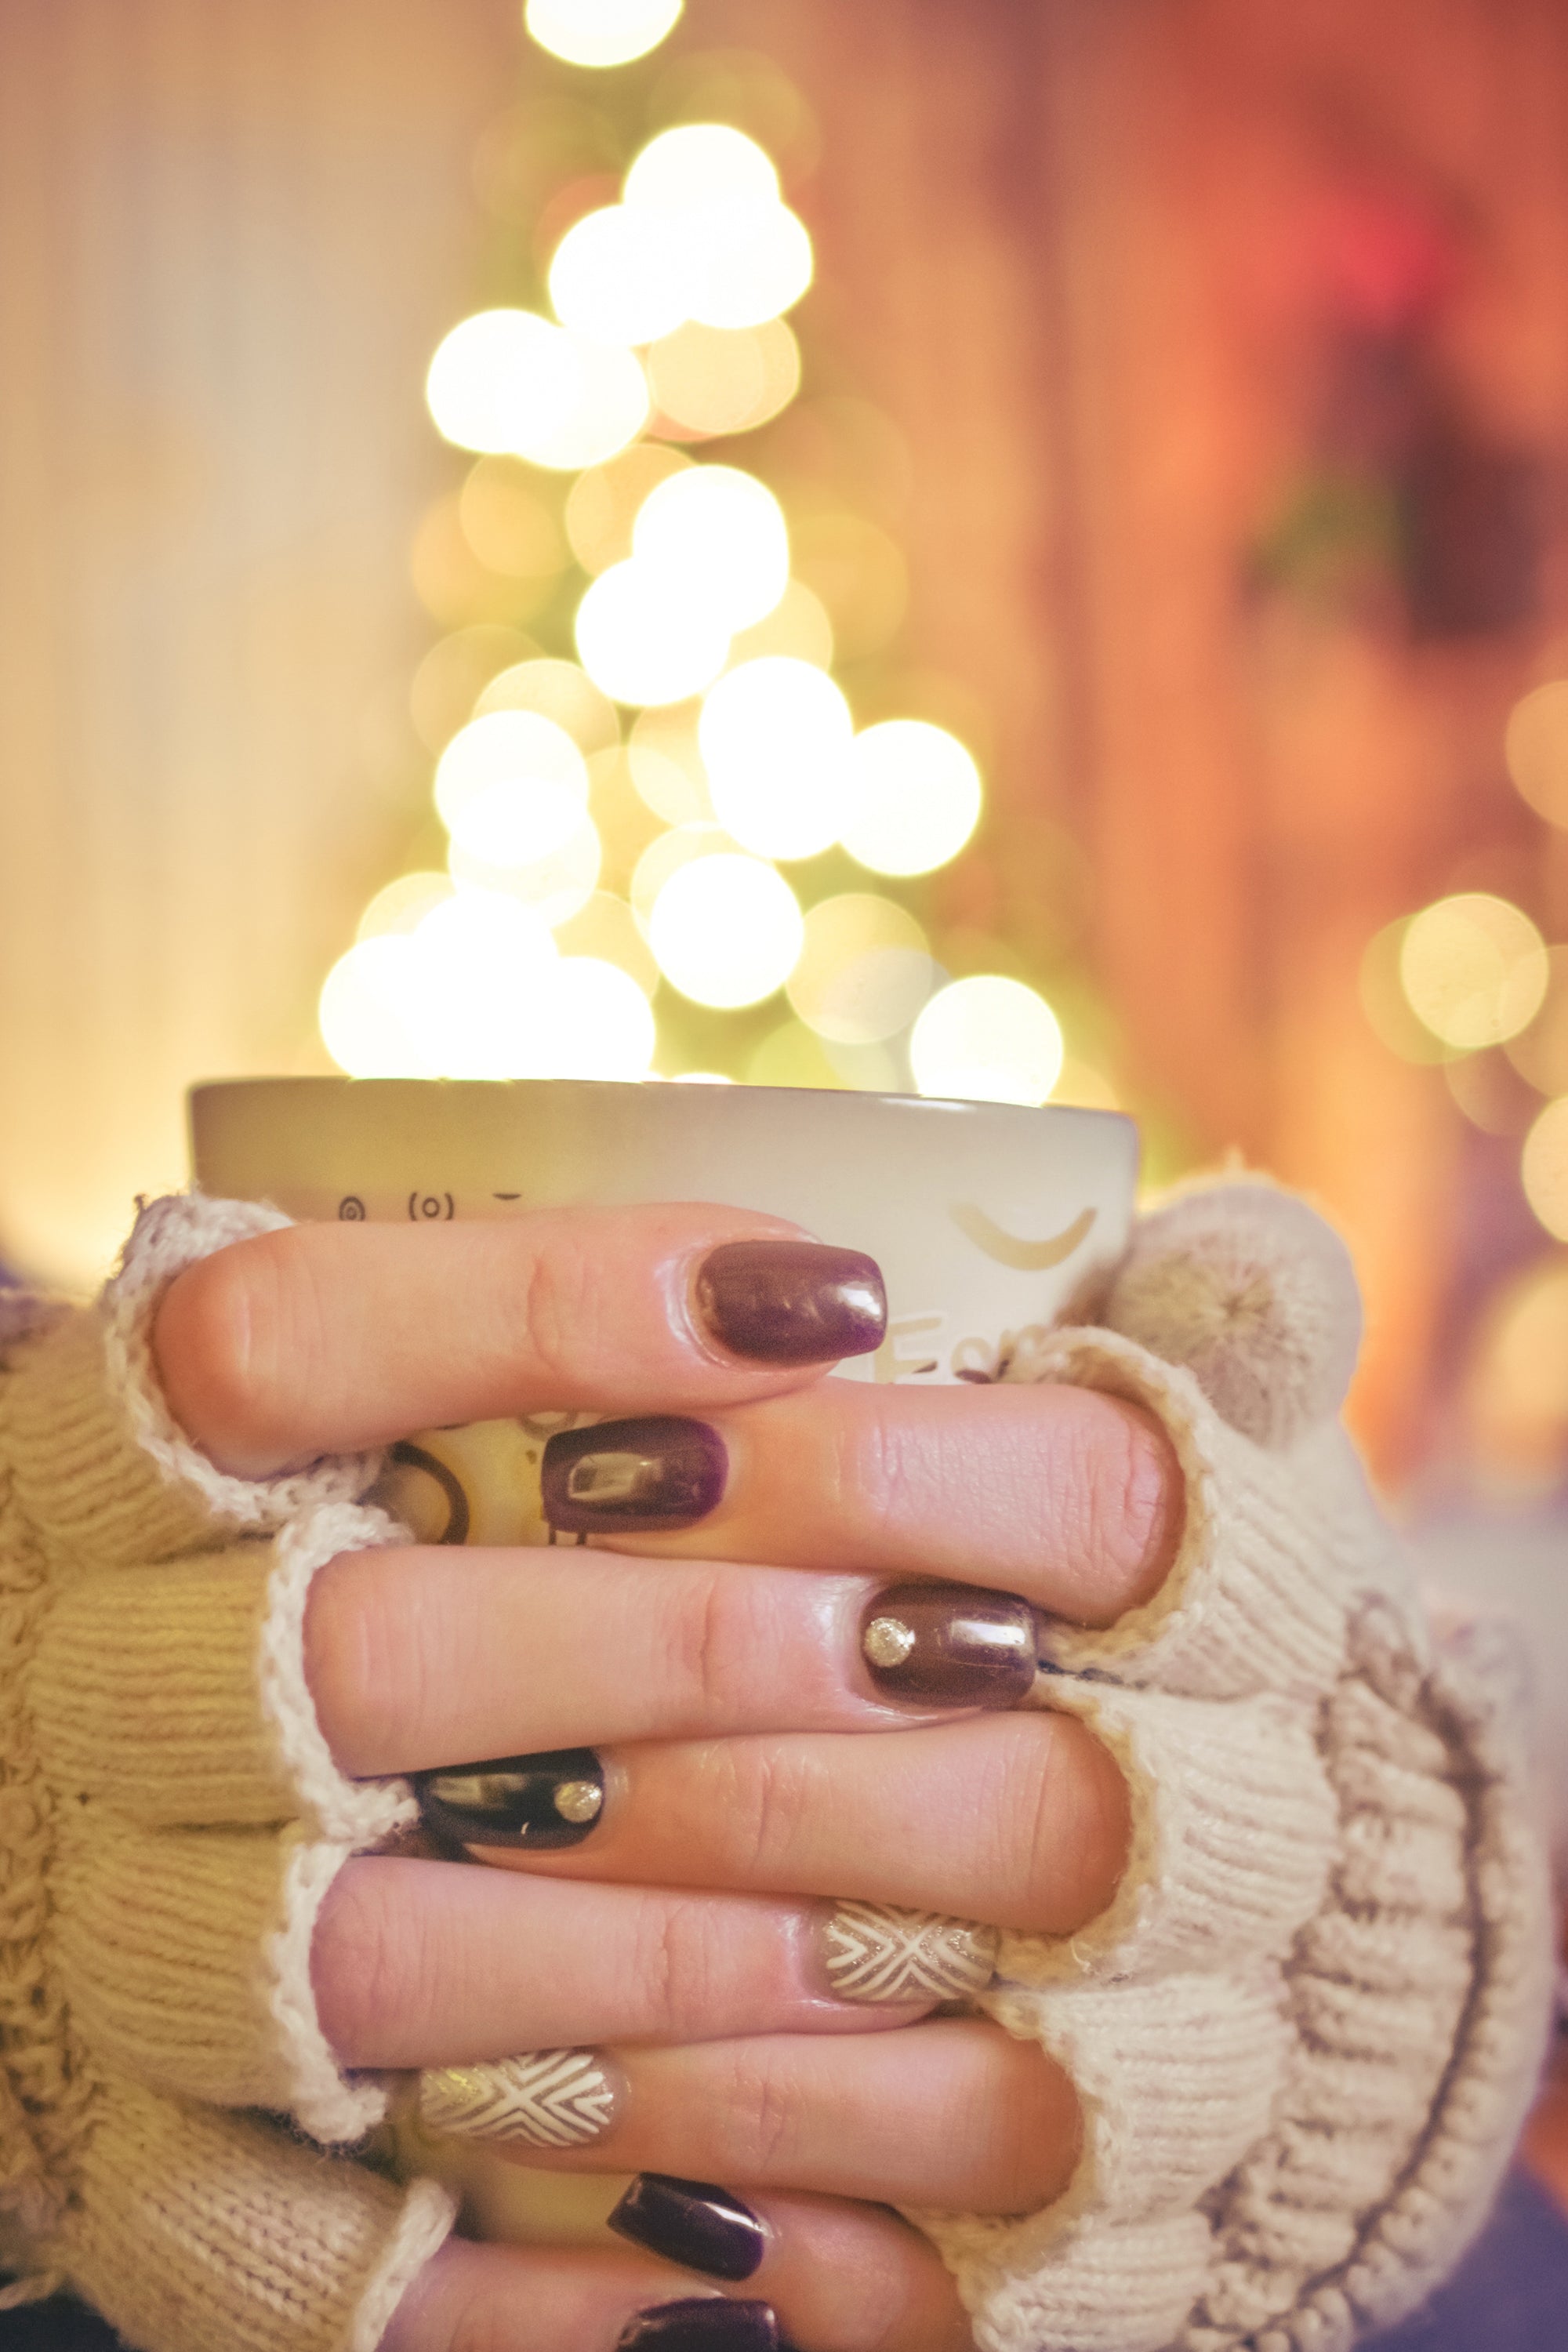 Perfect nail designs for Christmas